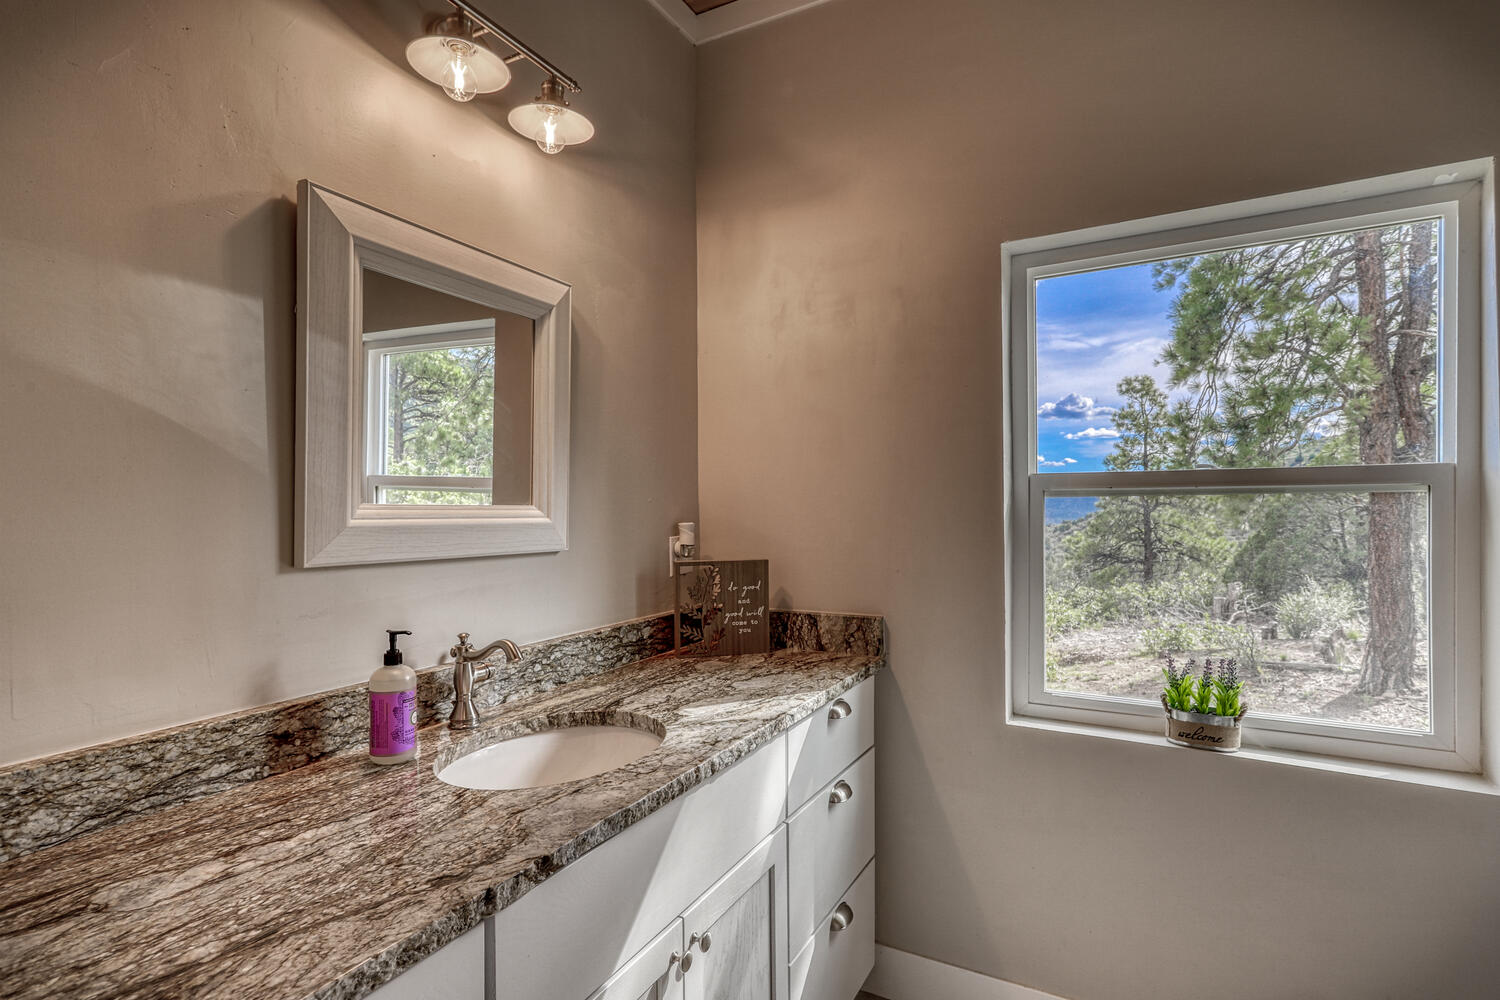 Second bathroom in vacation rental with great mountain views by A River Runs Thru It